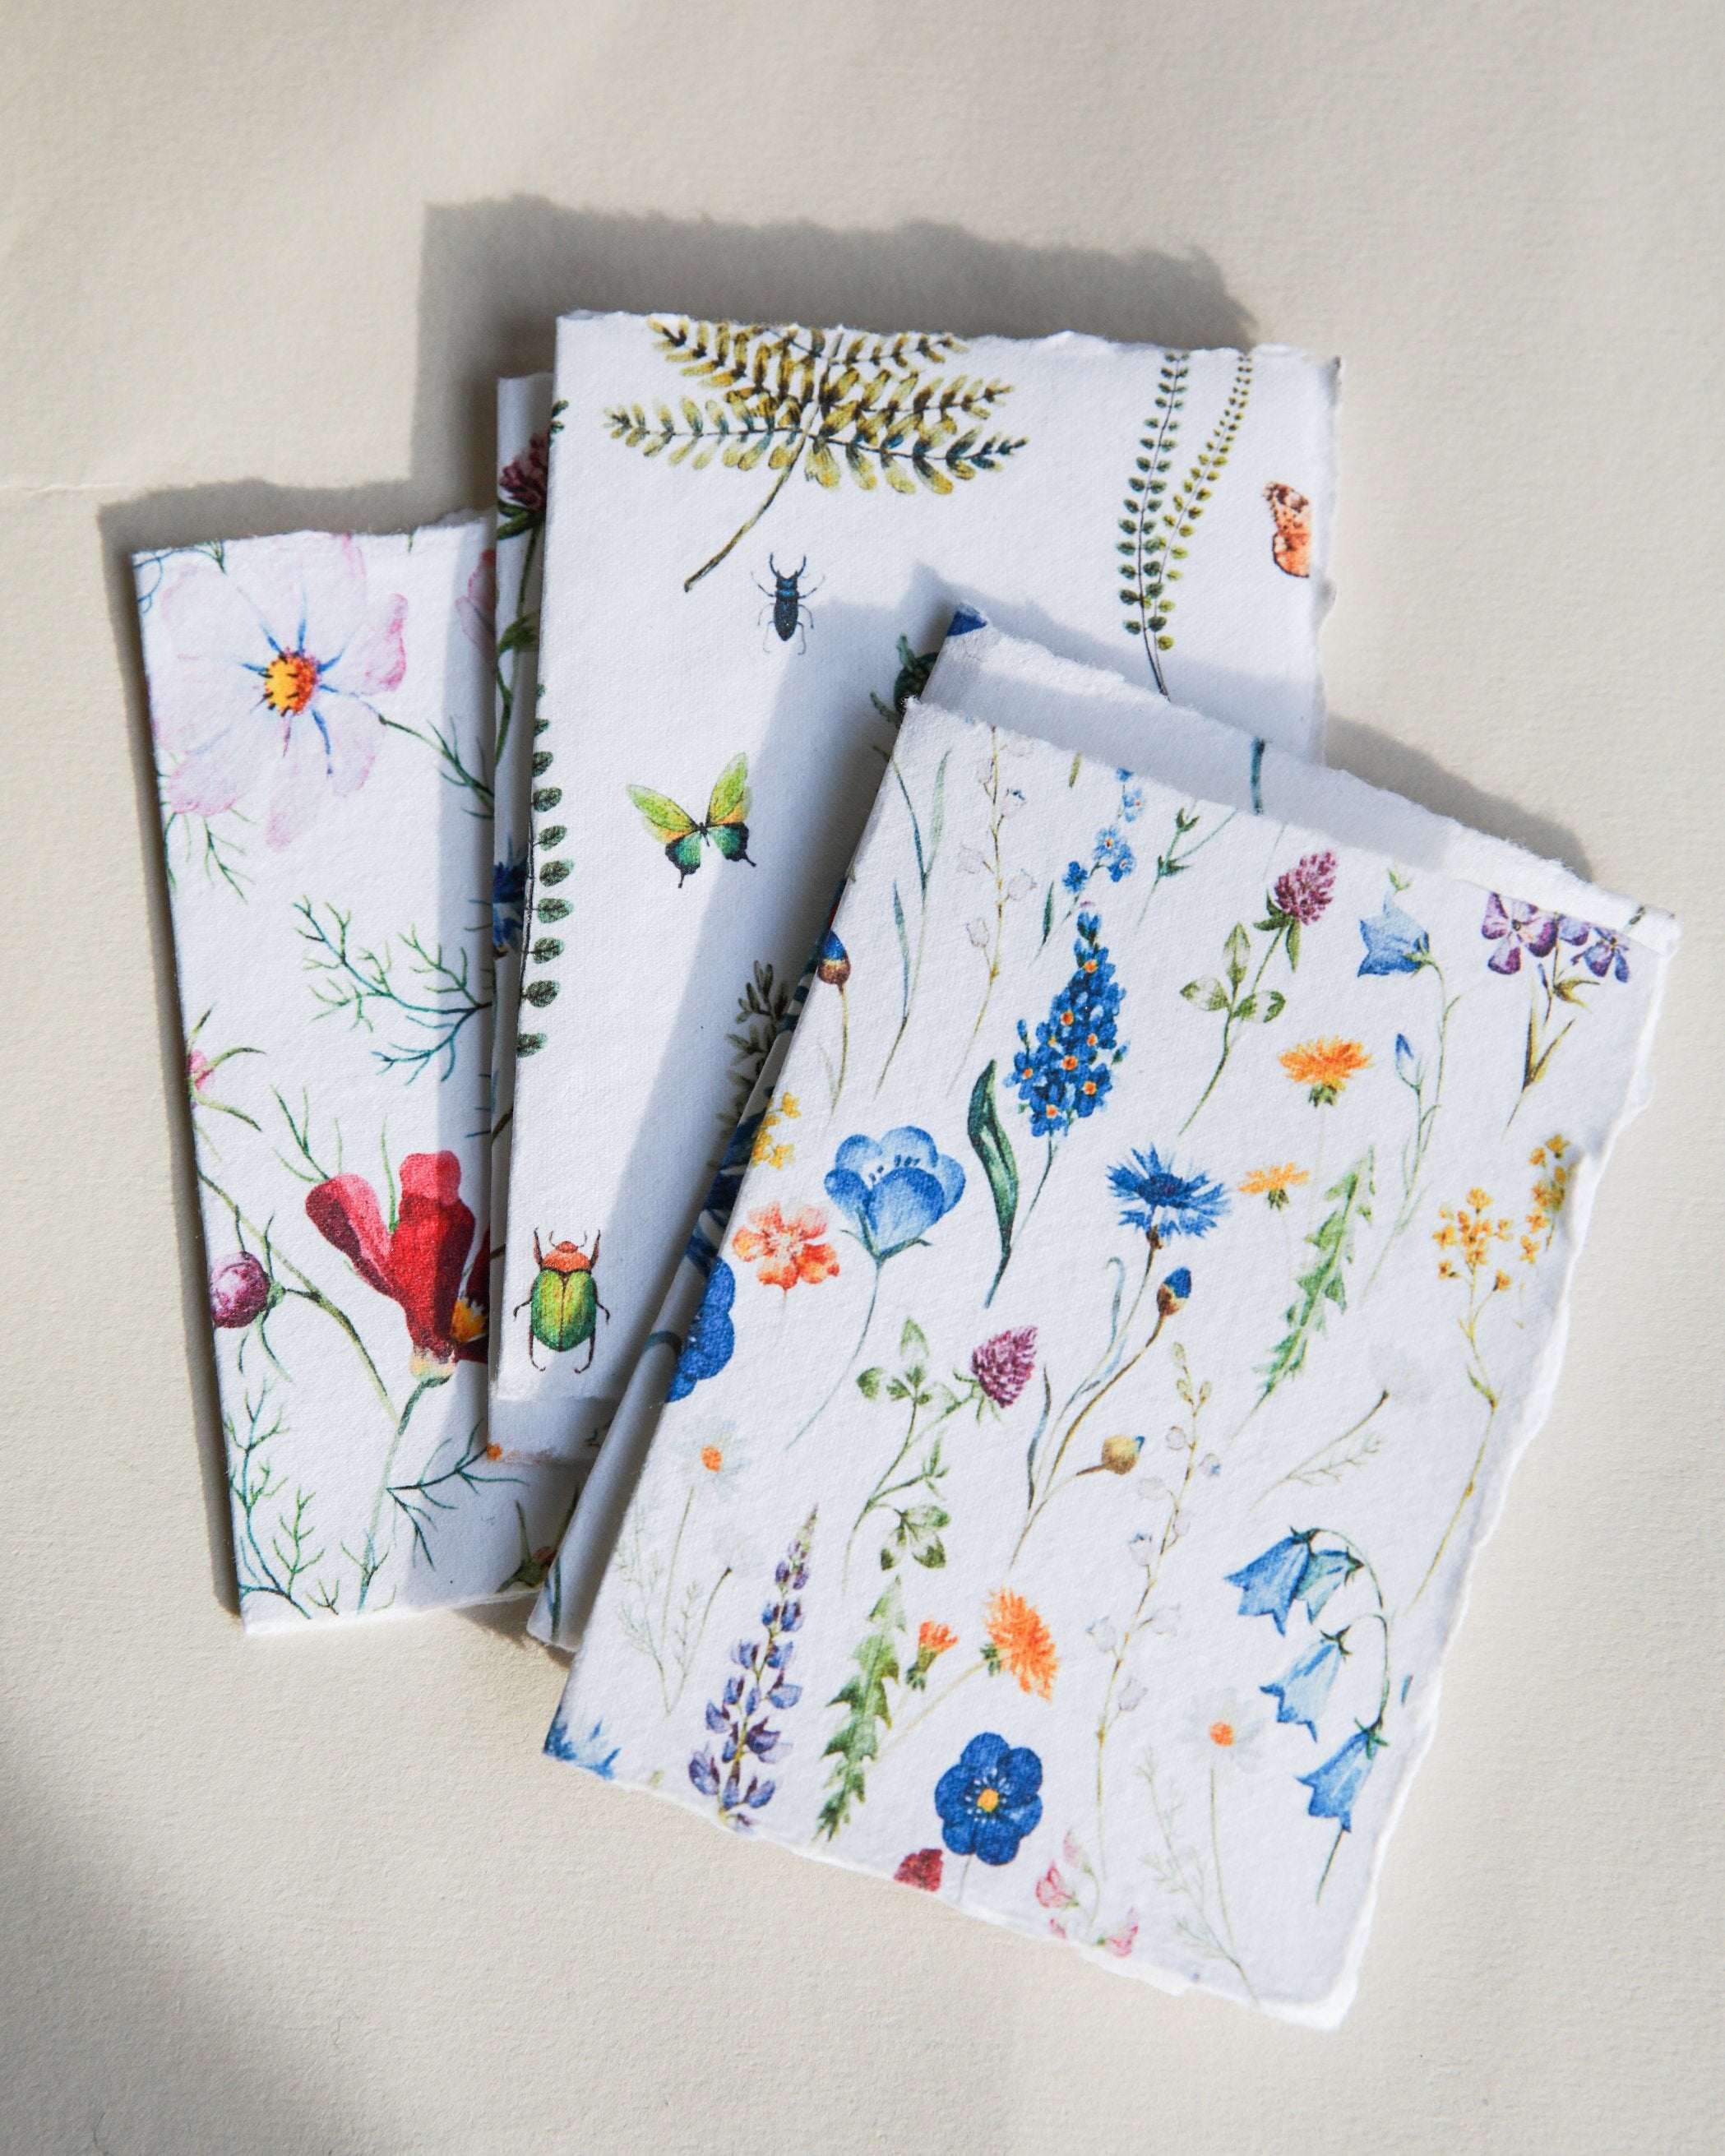 Floral Gift Cards on Handmade Cotton Rag Paper - Feathers and Stone